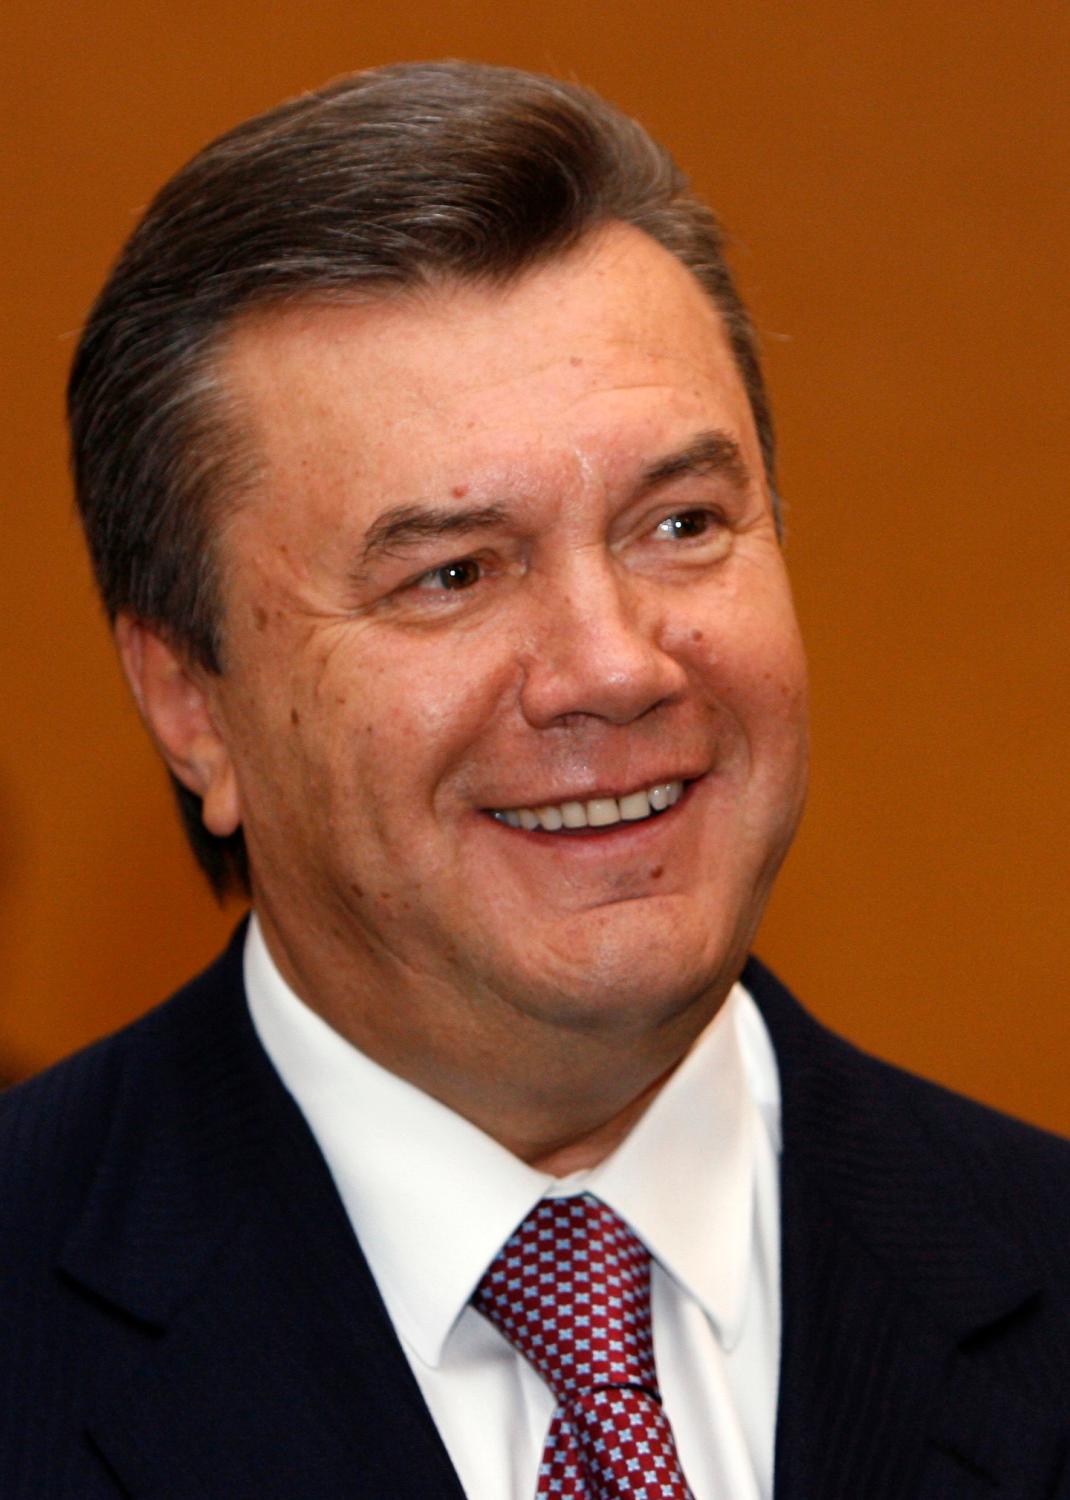 Ukraine's Prime Minister and Regions Party leader Viktor Yanukovich smiles as he talks to the media after voting during the parliamentary election at a polling station in Kiev September 30, 2007.